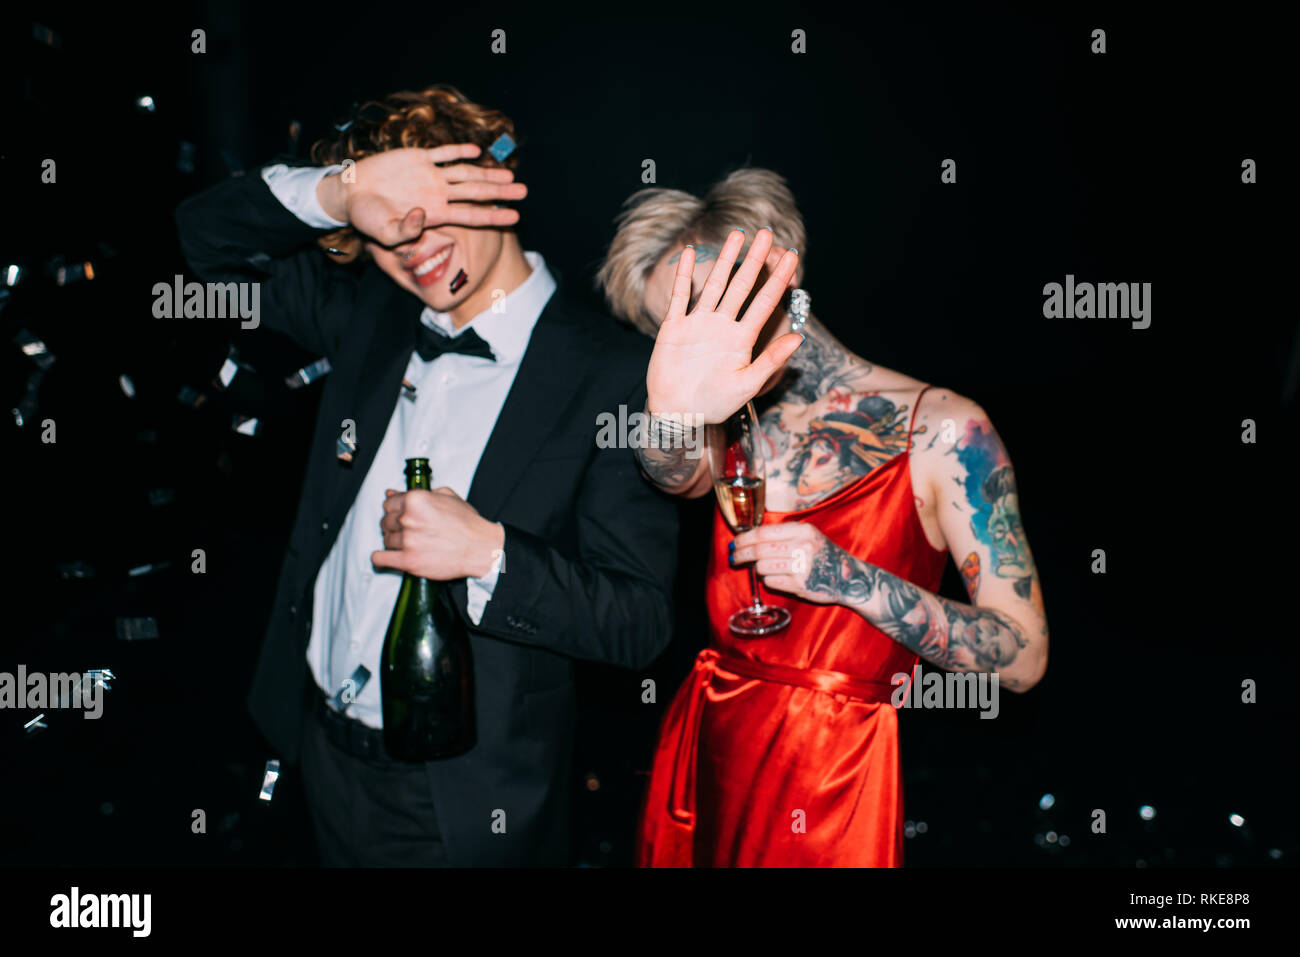 couple covering face while holding alcohol drinks on party isolated on black Stock Photo